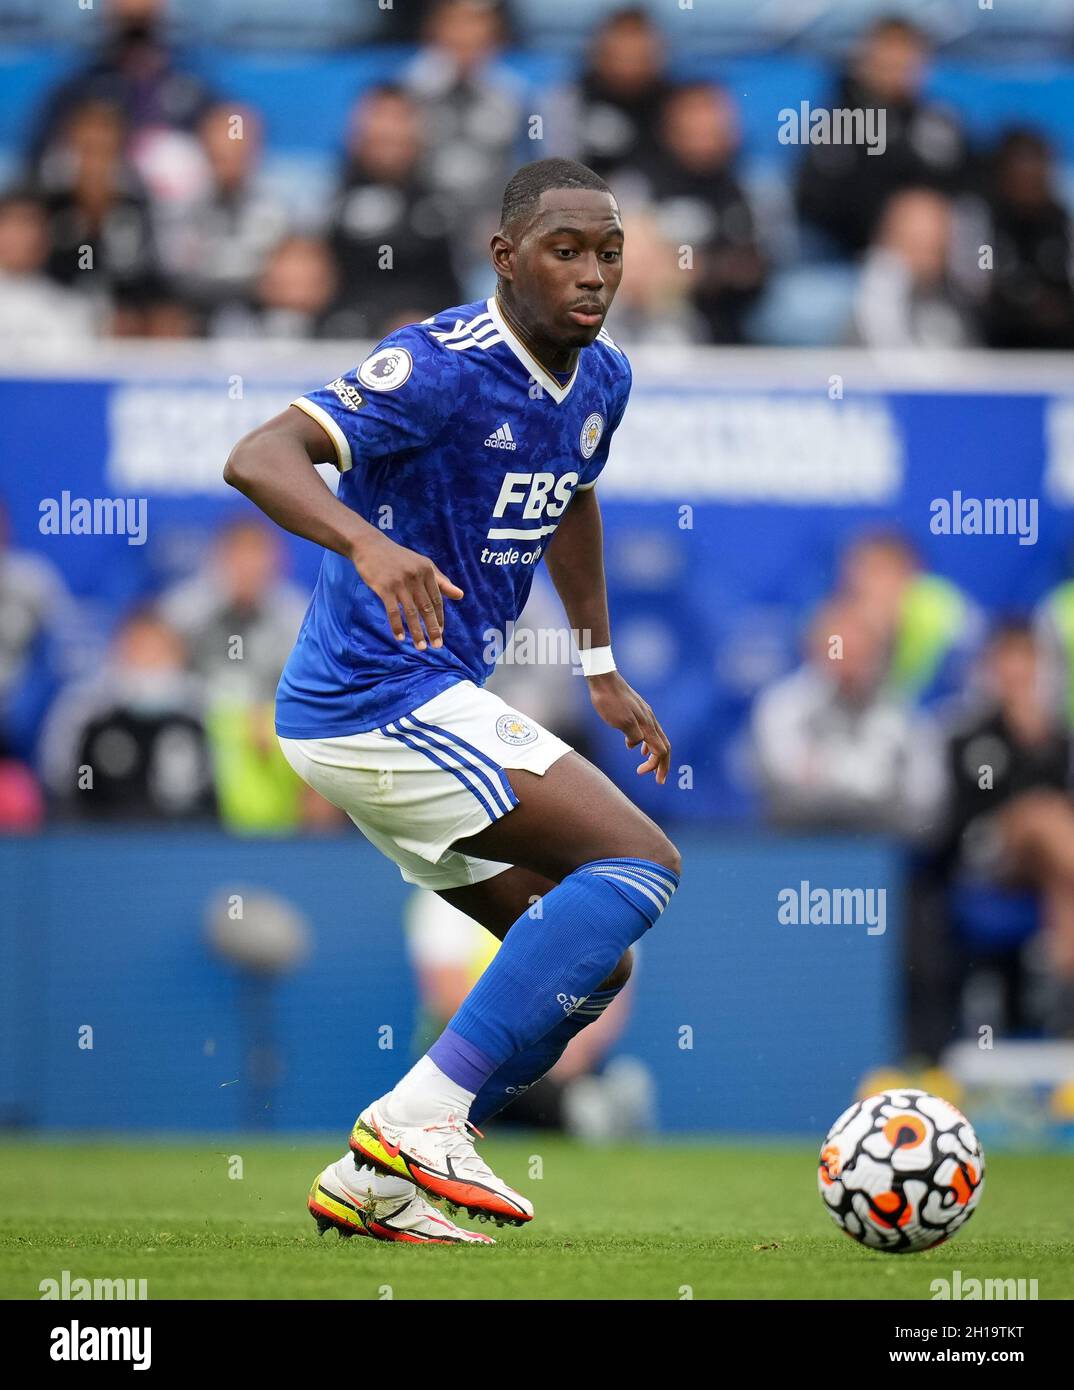 Leicester, UK. 16th Oct, 2021. Boubakary Soumare of Leicester City during the Premier League match between Leicester City and Manchester United at the King Power Stadium, Leicester, England on 16 October 2021. Photo by Andy Rowland. Credit: PRiME Media Images/Alamy Live News Stock Photo